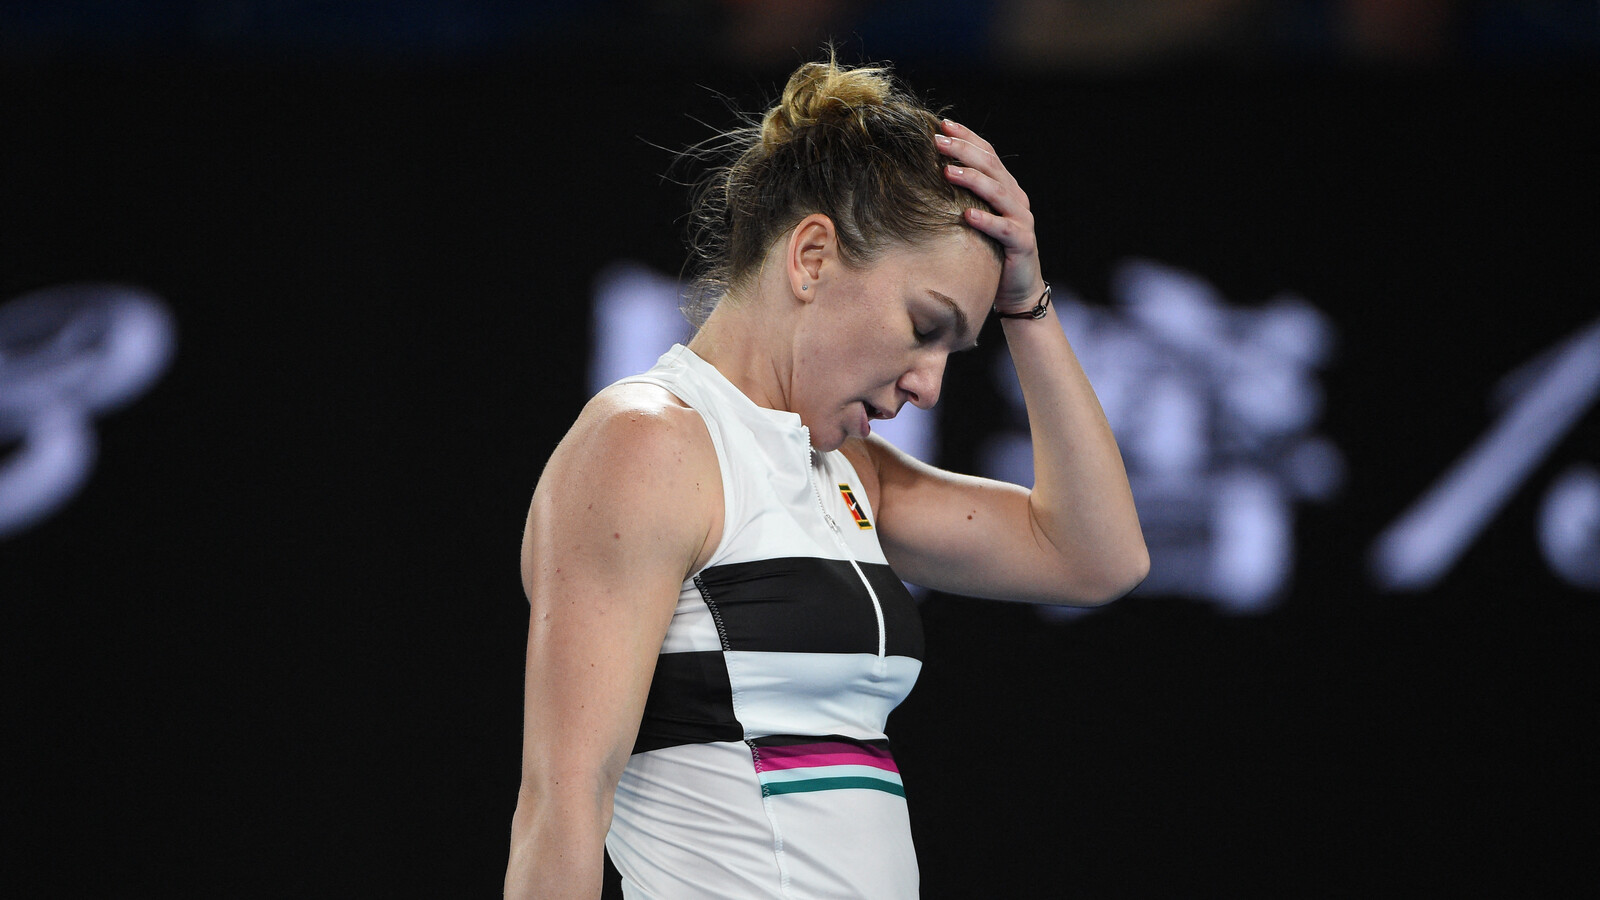 'Blame Has To Be Made': Halep's Team Questioned By Stubbs After Doping Ban